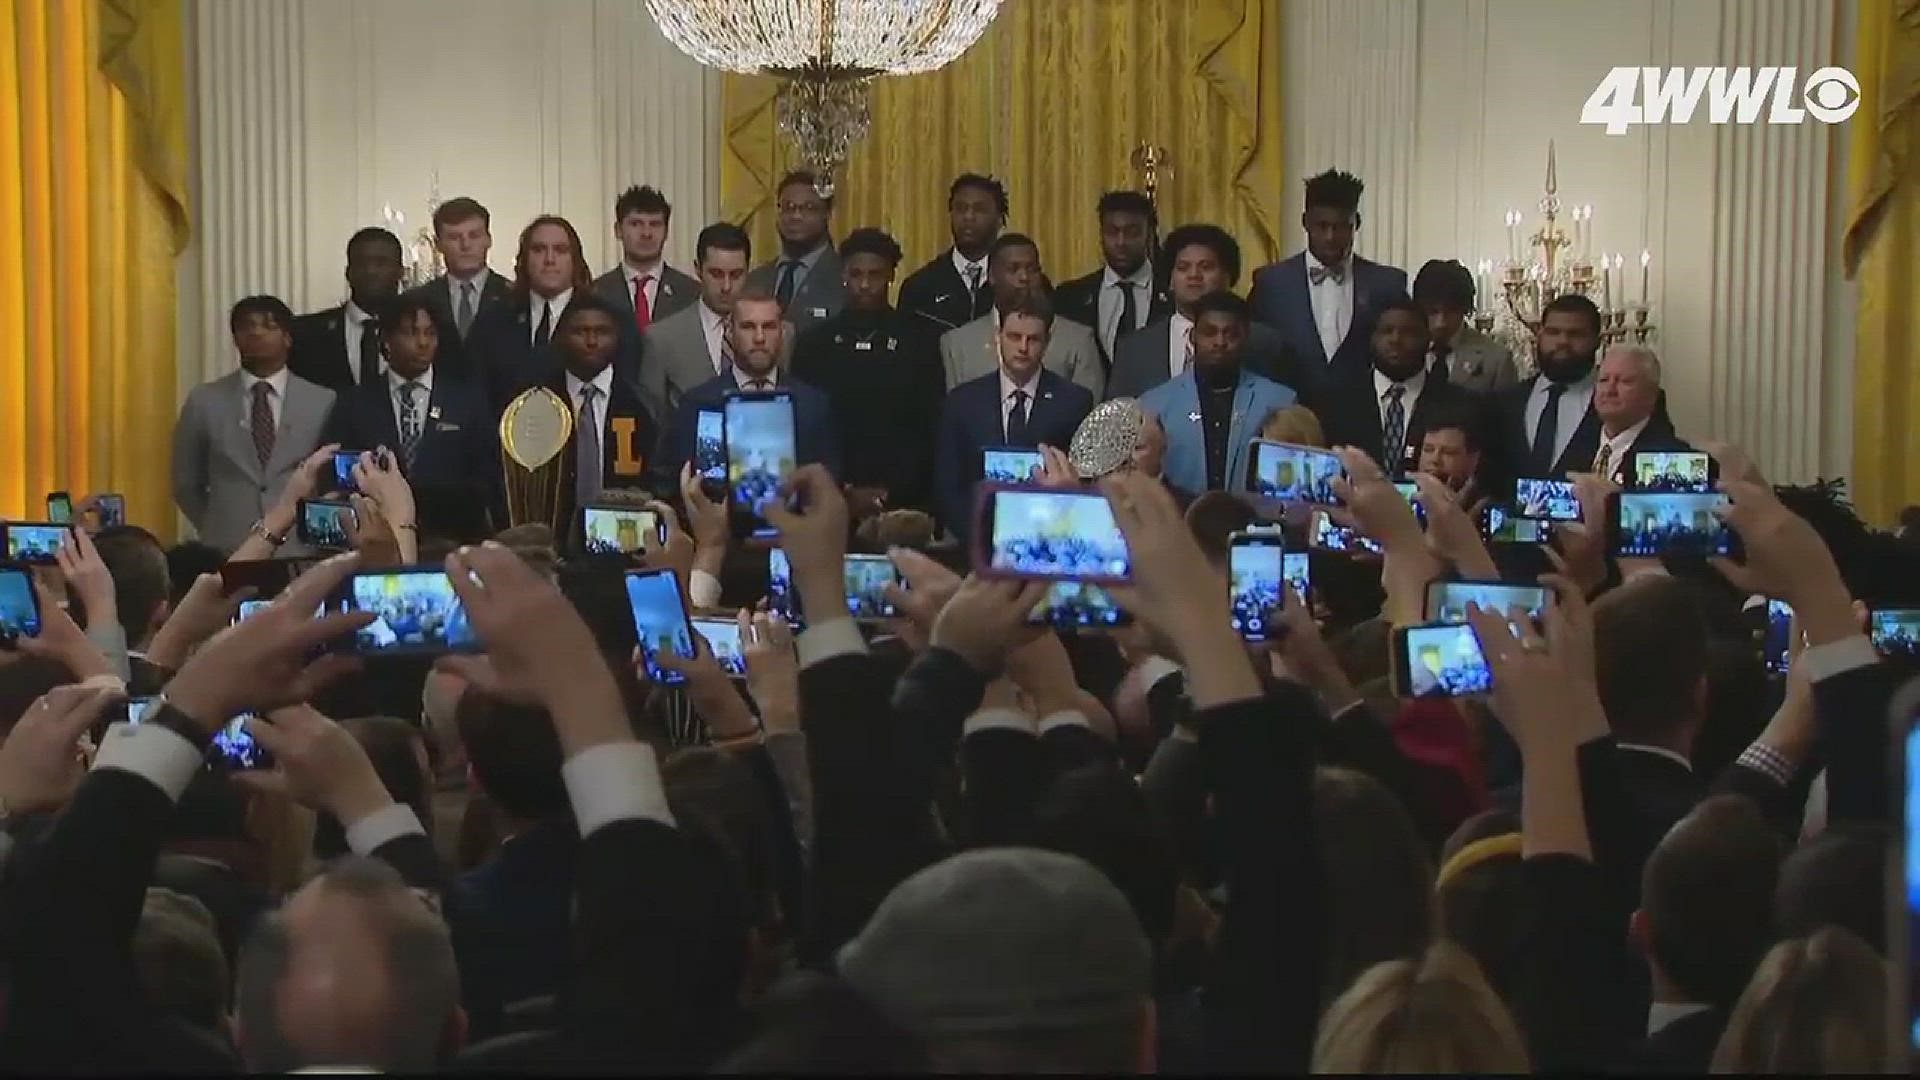 LSU’s national champion football team visited the White House Friday, four days after defeating Clemson in the Mercedes-Benz Superdome to claim the title.